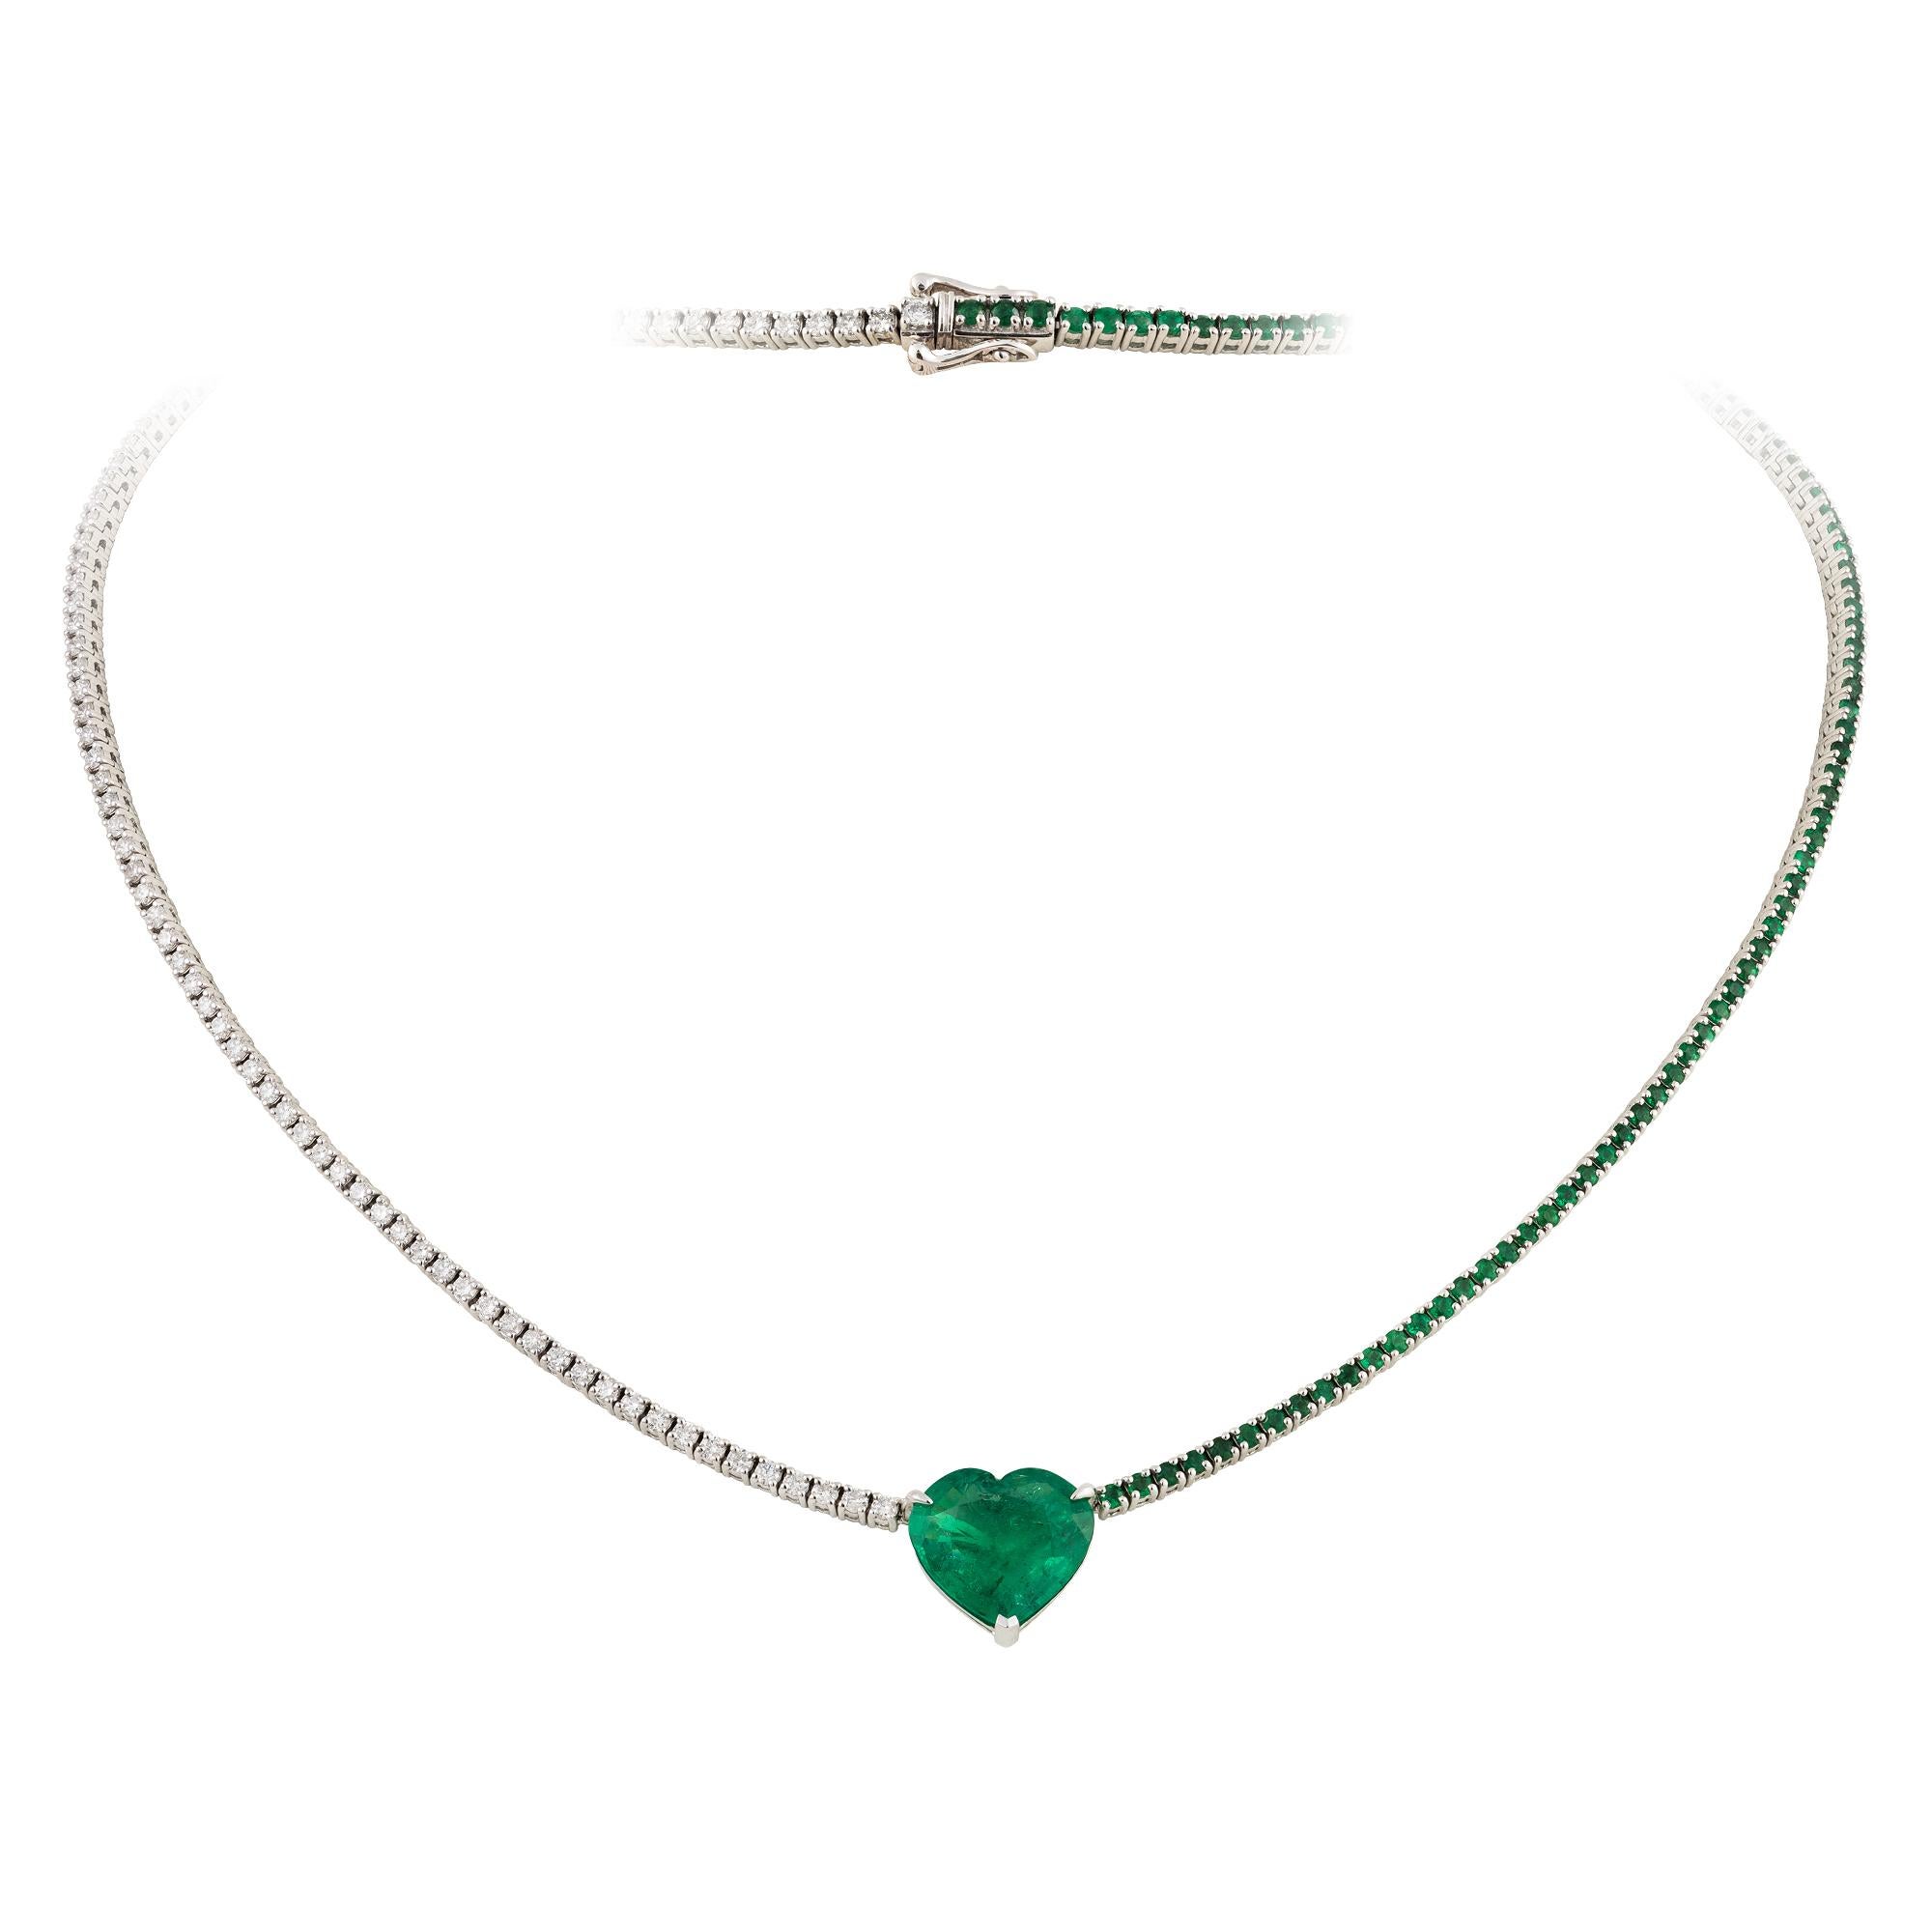 A Rare 18KT White Gold Emerald Diamond Necklace. Necklace is comprised of Finely Set Glittering Gorgeous Heart Shaped Emerald adorned with Diamonds and Emeralds!!! The Emeralds and Diamonds are of Exquisite and Fine Quality. T.C.W. approx 9.50CTS!!!